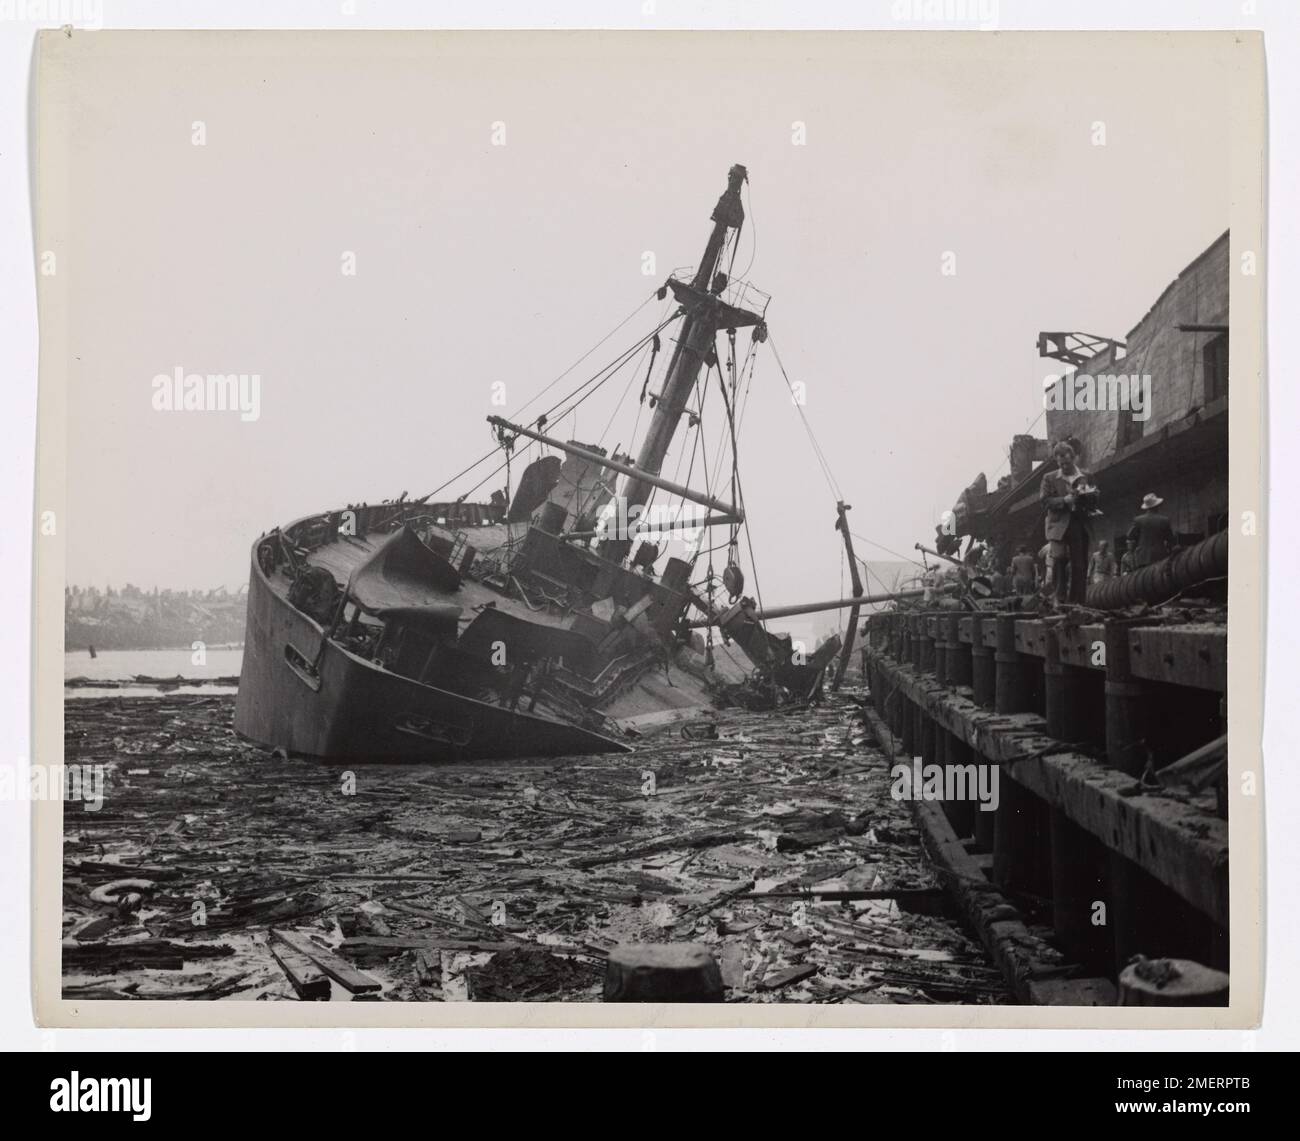 SS Wilson B. Keene, Texas City Fire. This image depicts a ship listing into debris-filled water. Stock Photo